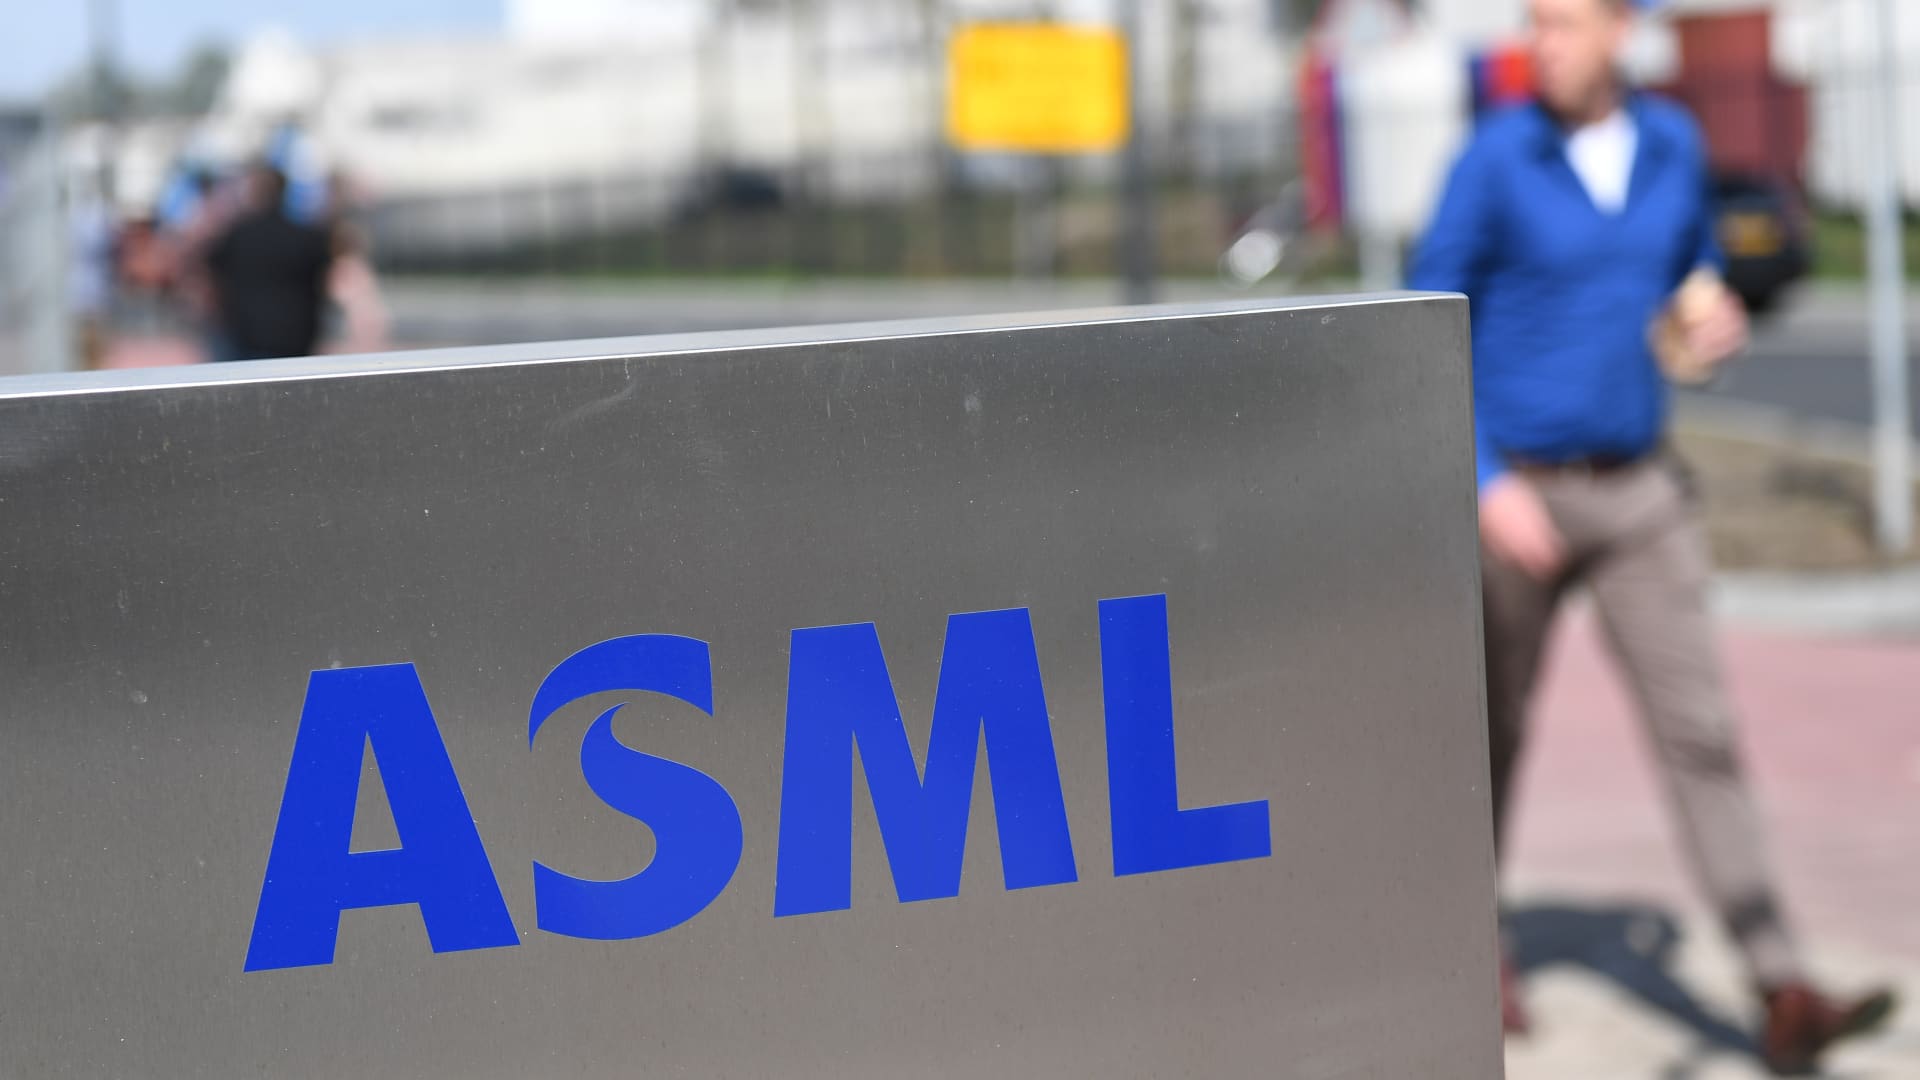 Critical chip firm ASML says former China employee misappropriated data